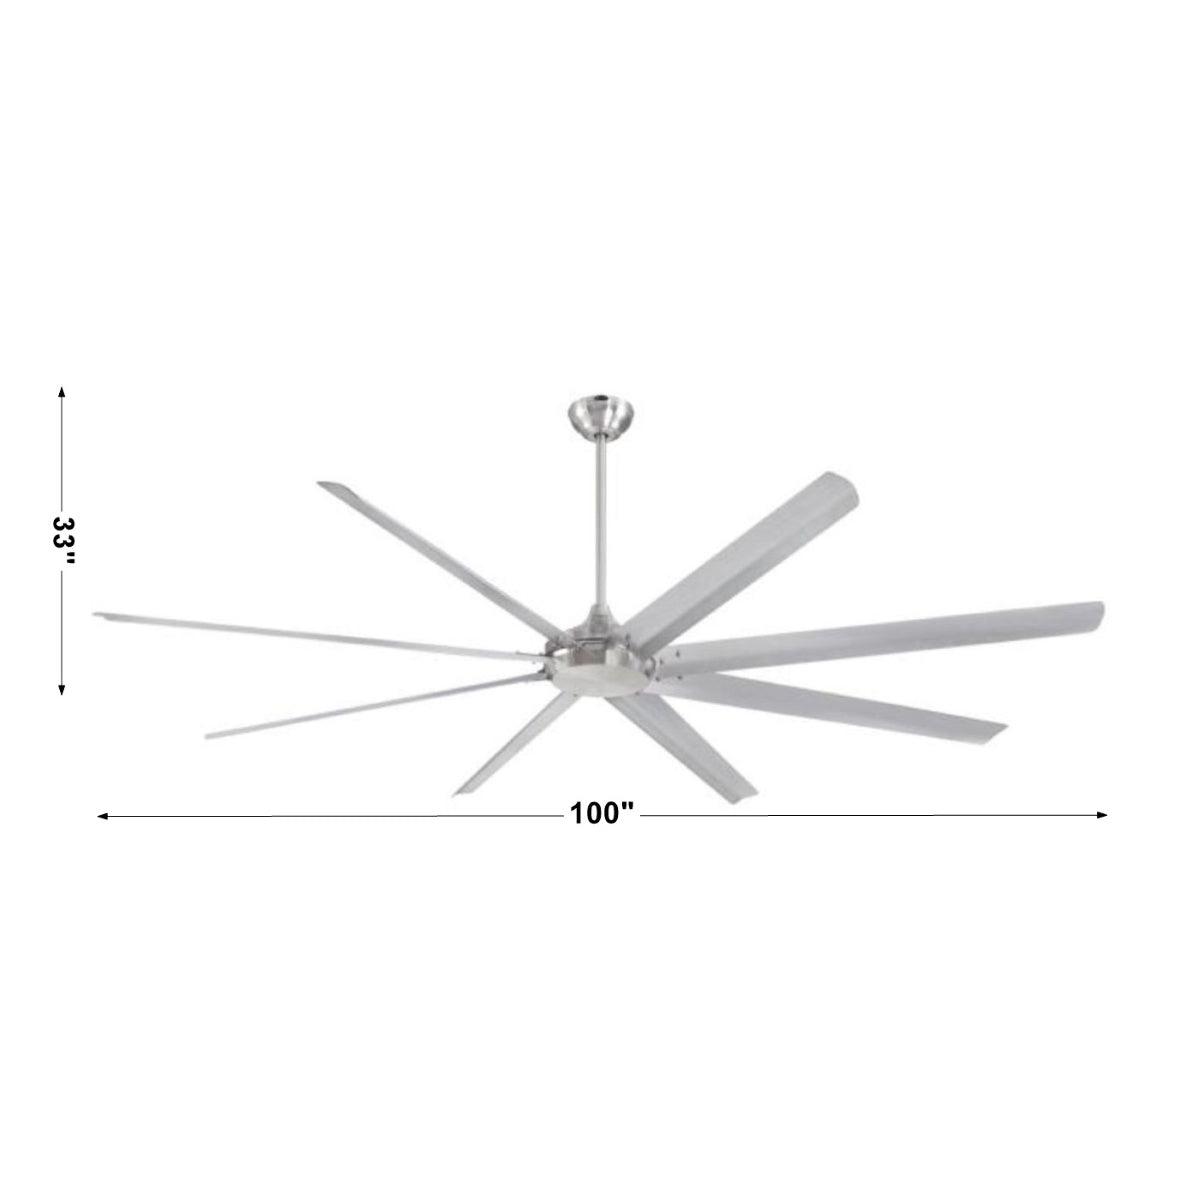 Widespan 100 Inch DC Industrial Windmill Outdoor Ceiling Fan With Remote, 6 Blades - Bees Lighting